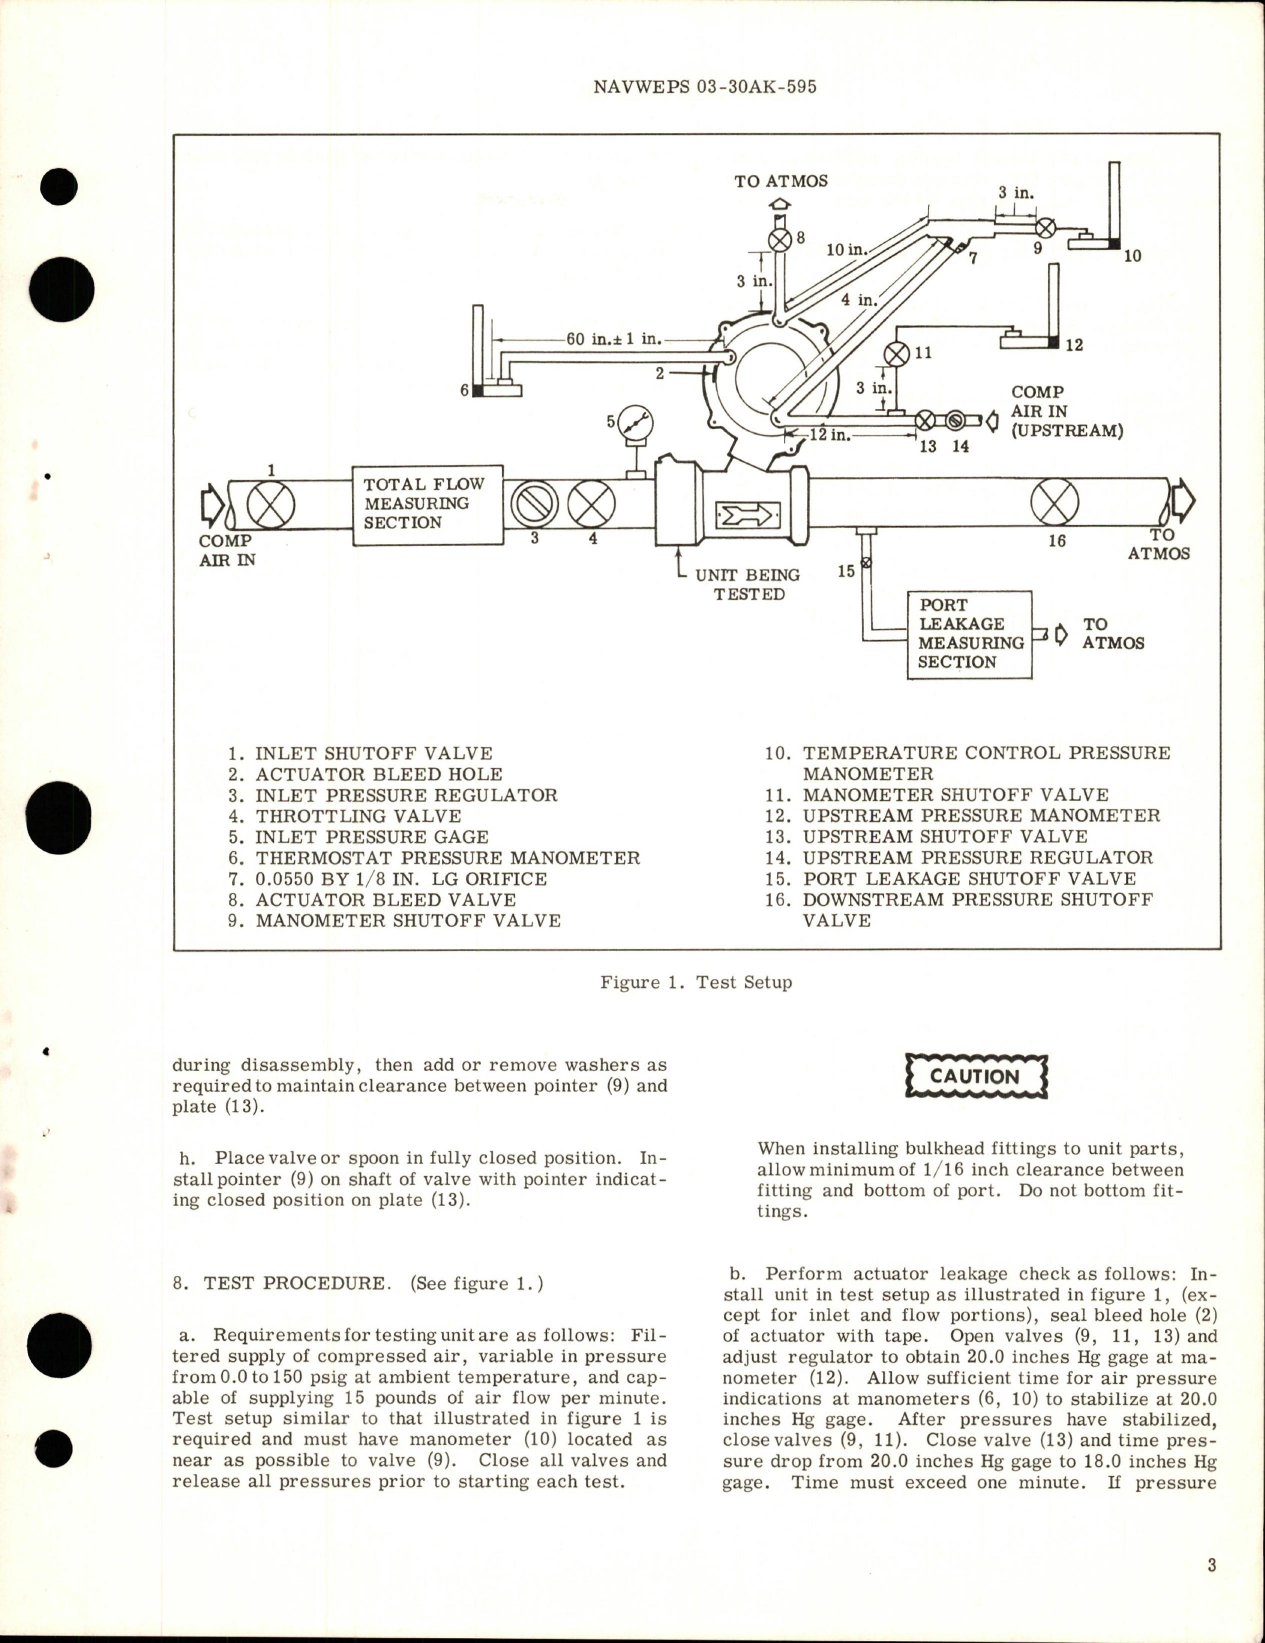 Sample page 5 from AirCorps Library document: Overhaul Instructions with Parts Breakdown for Air Shutoff Valve - Part 106282-1